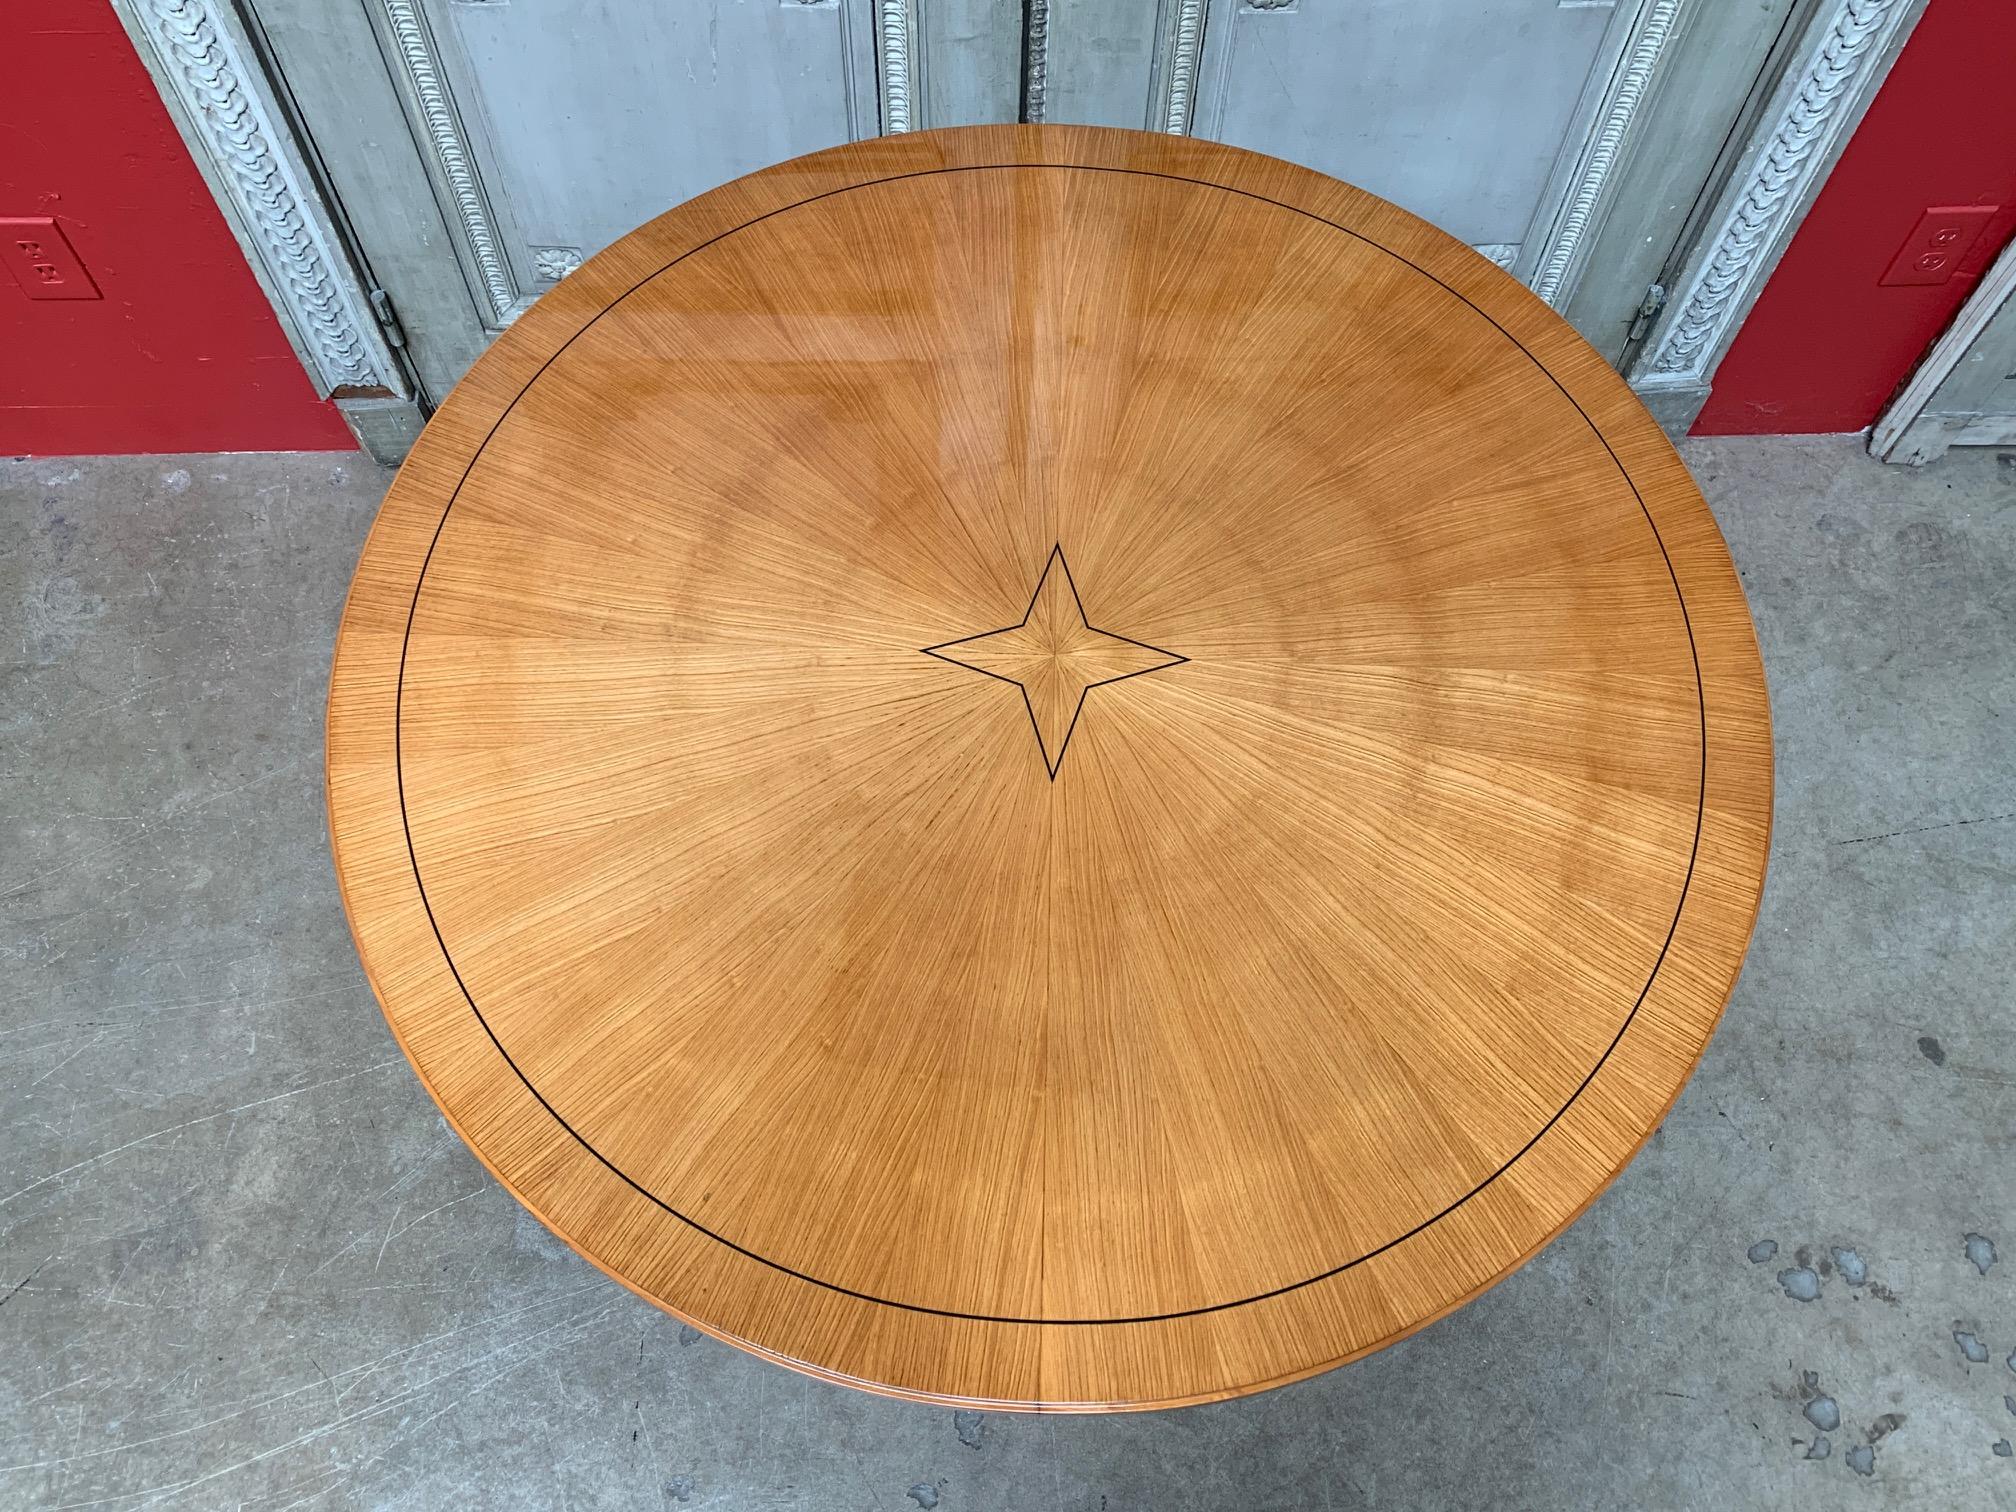 20th Century French Directoire Style Round Mahogany Table with Parquetry Inlay 1